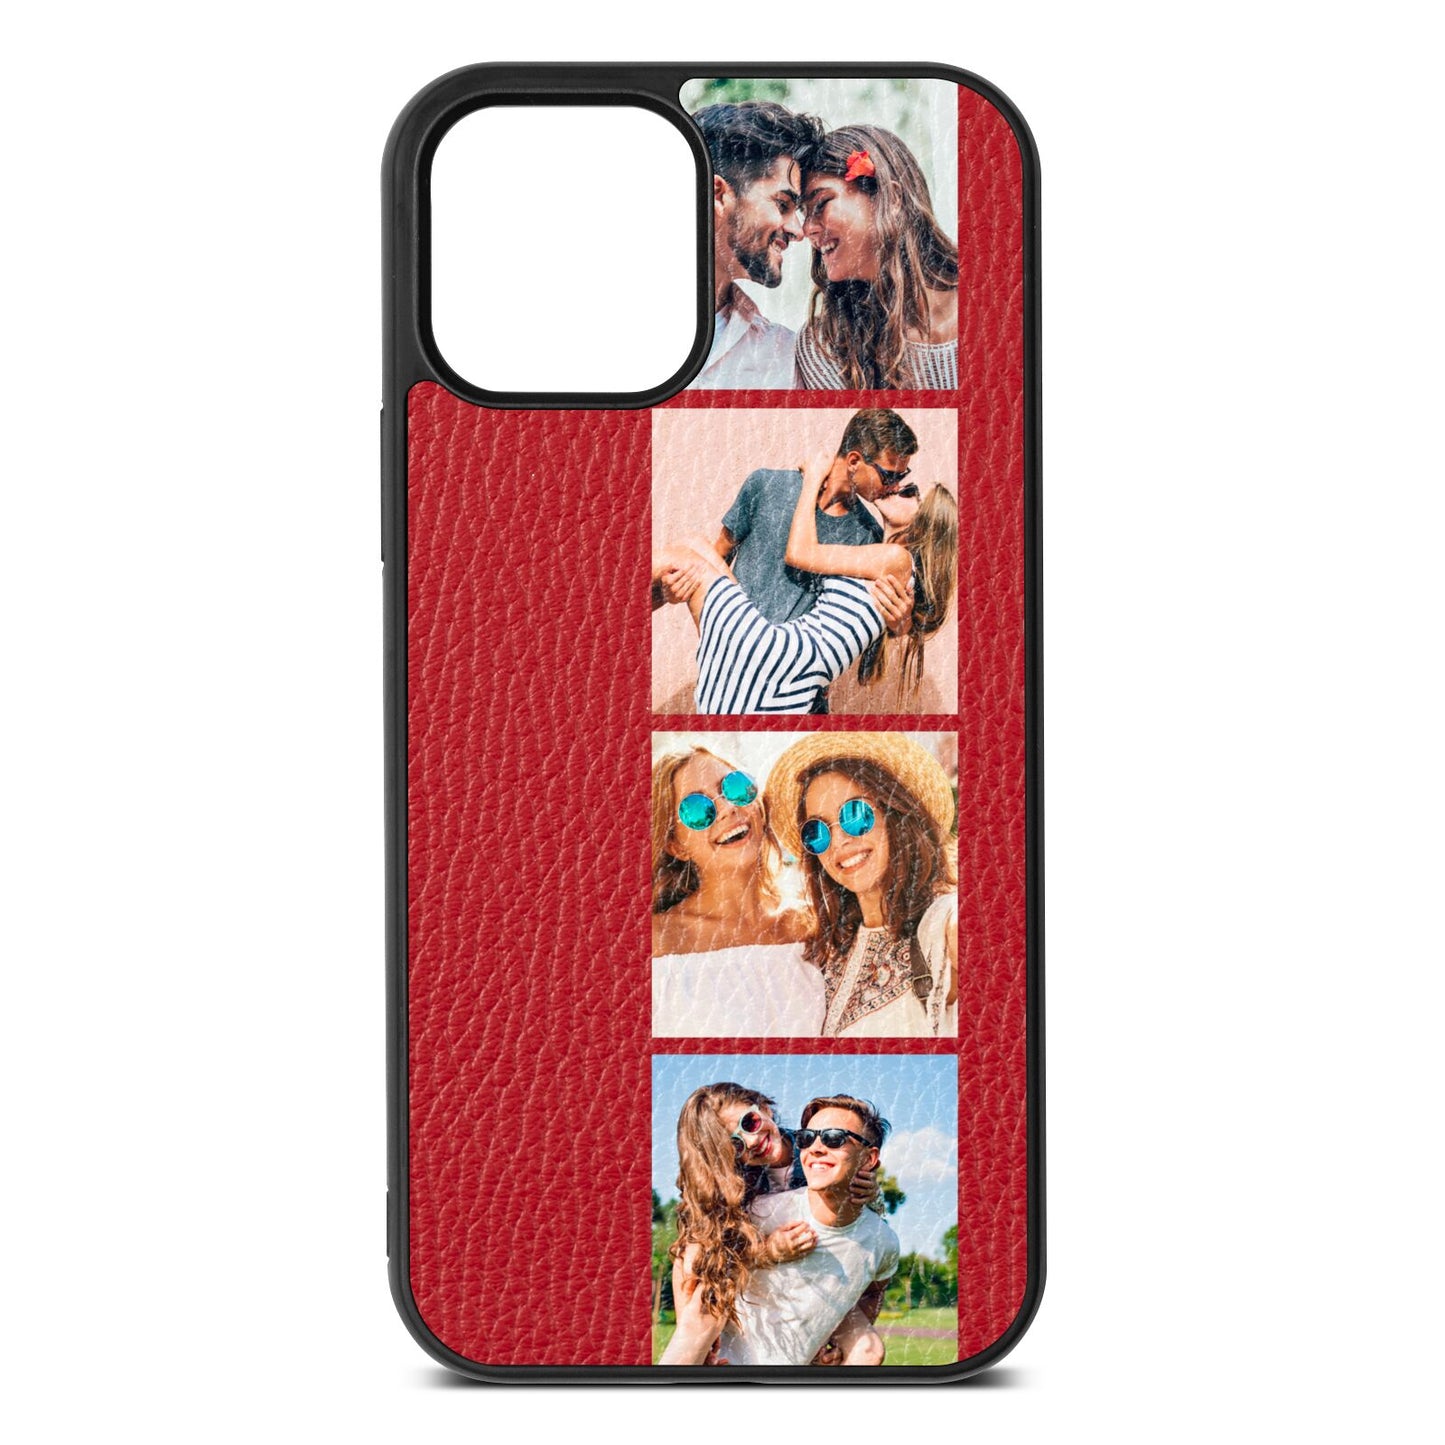 Photo Strip Montage Upload Red Pebble Leather iPhone 12 Case